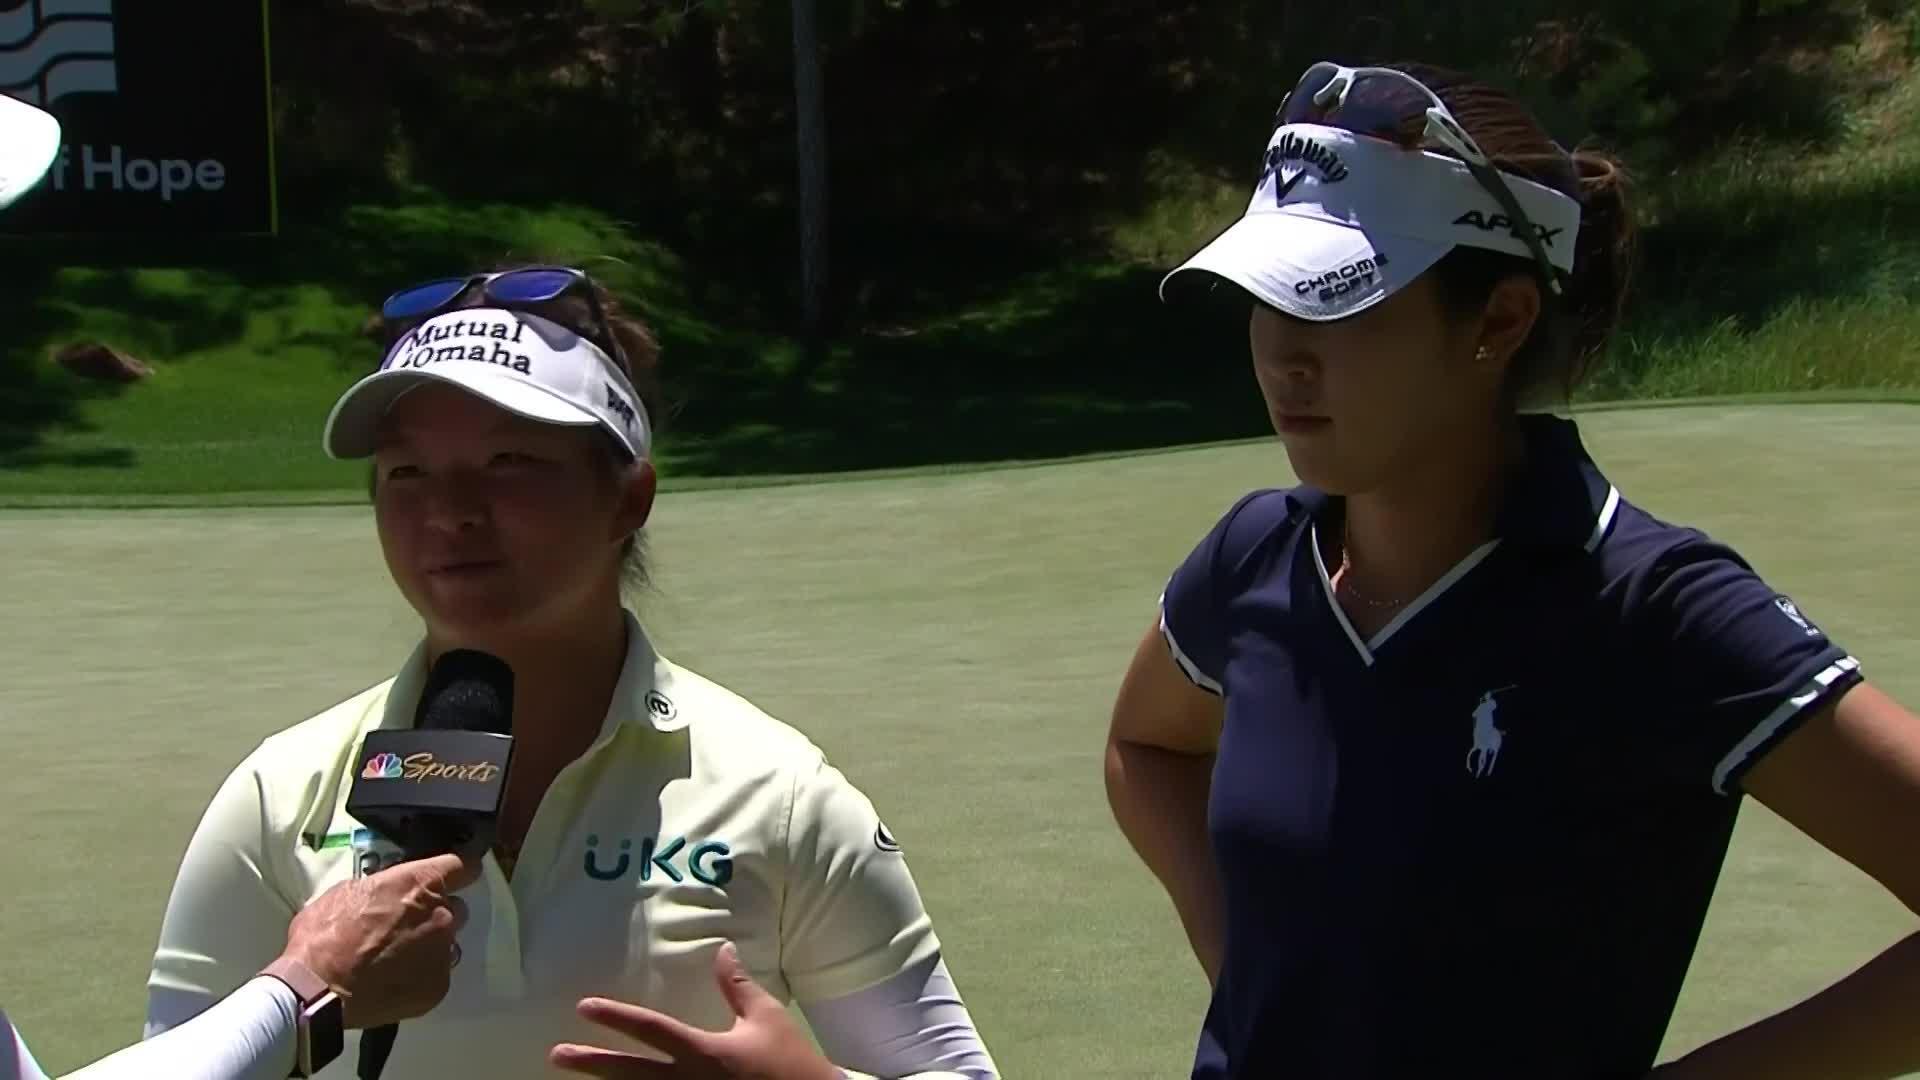 Megan Khang and Andrea Lee interview after day 1 of Bank of Hope Match Play